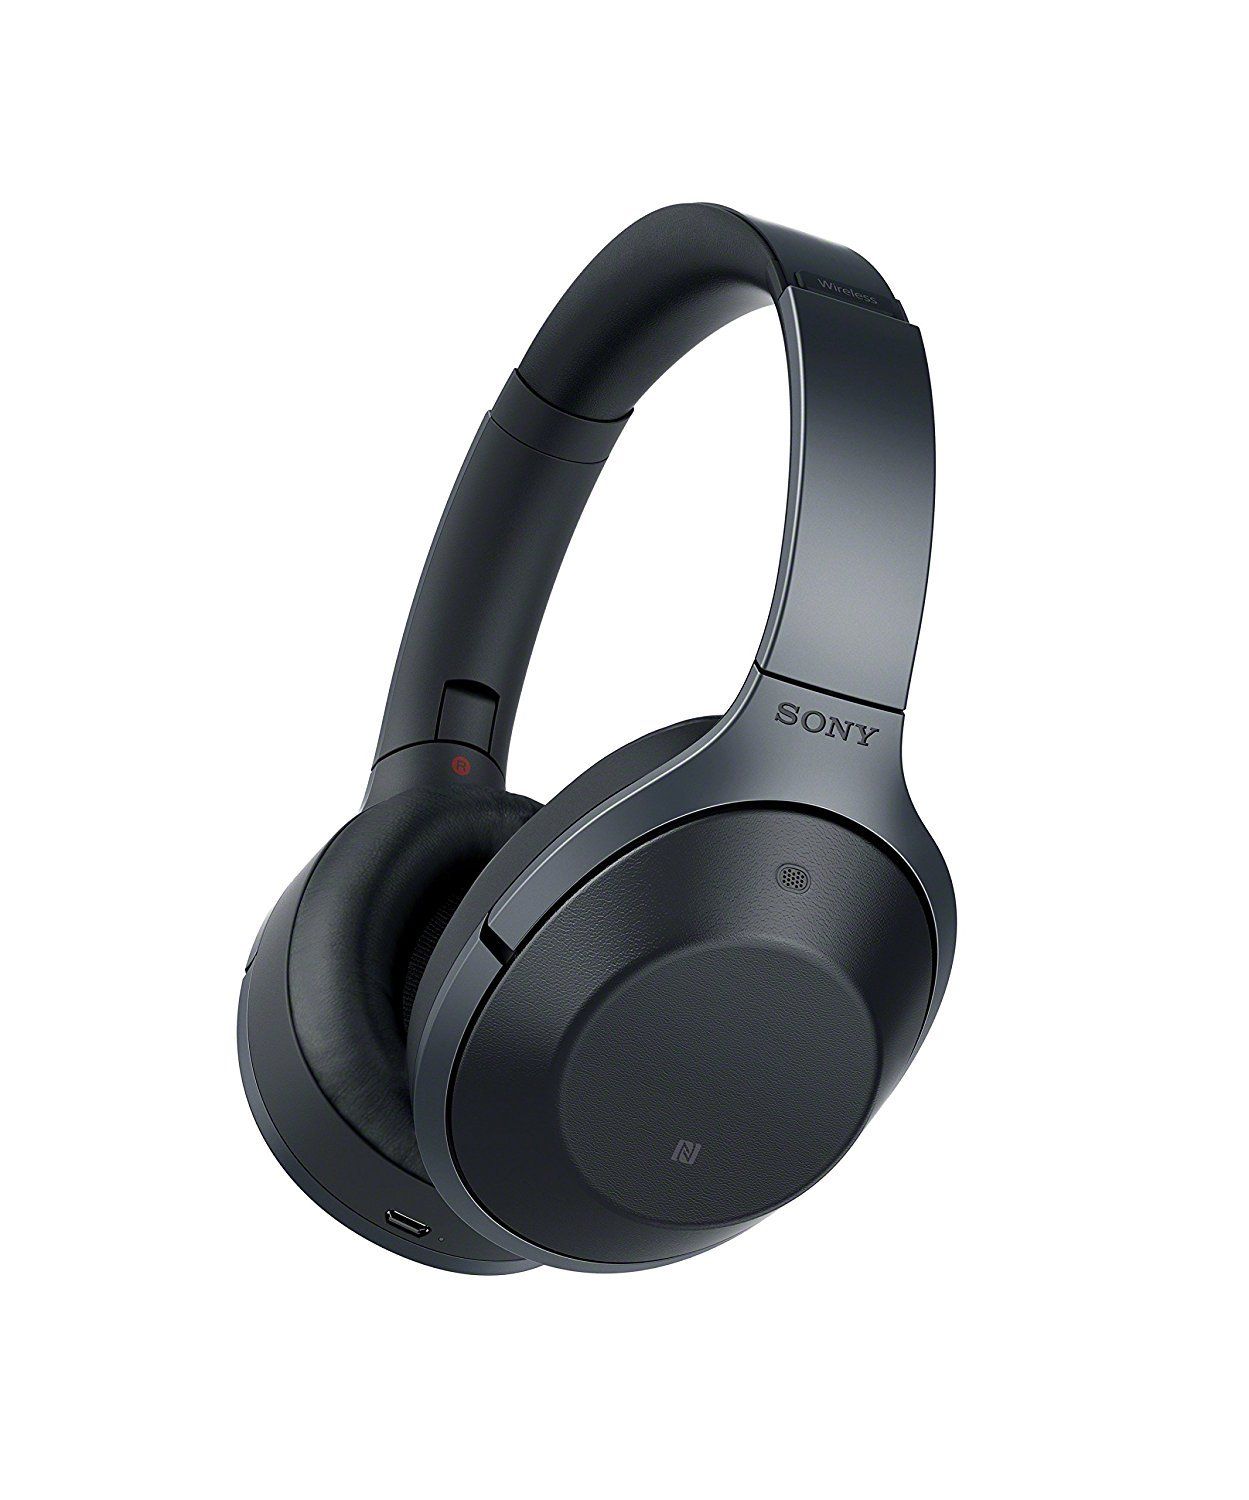 Sony MDR1000X Bluetooth Noise-Canceling Headphones are on Sale Now